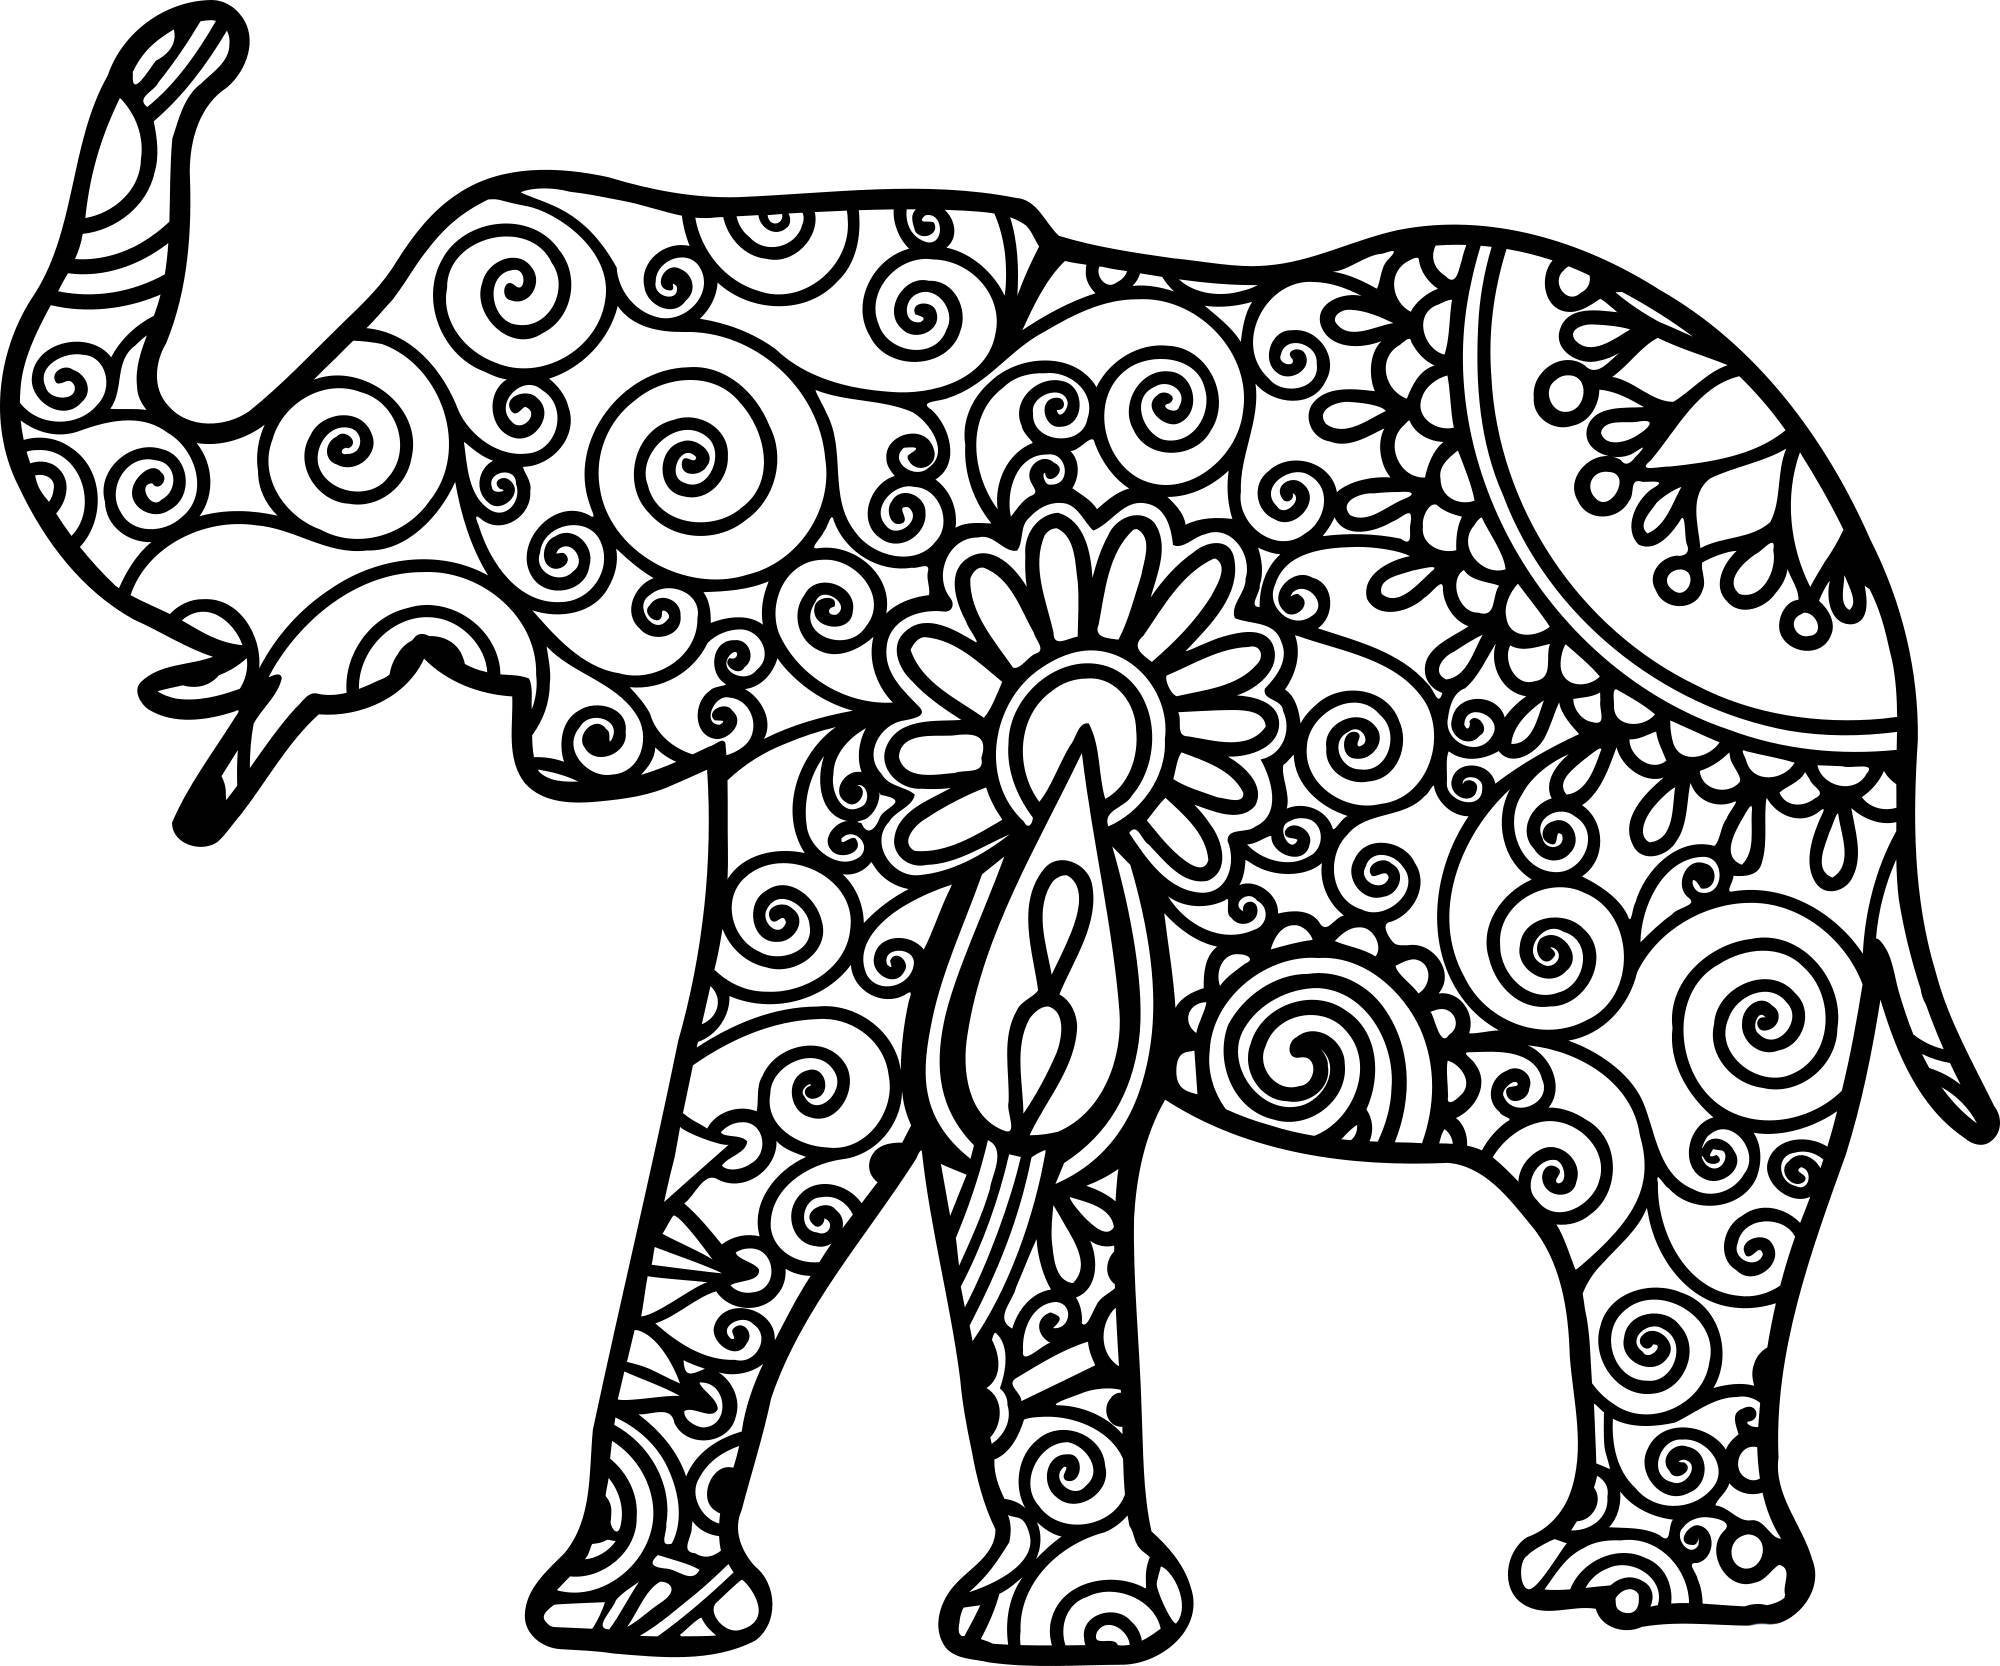 coloring pages for adults difficult elephants delicatessen